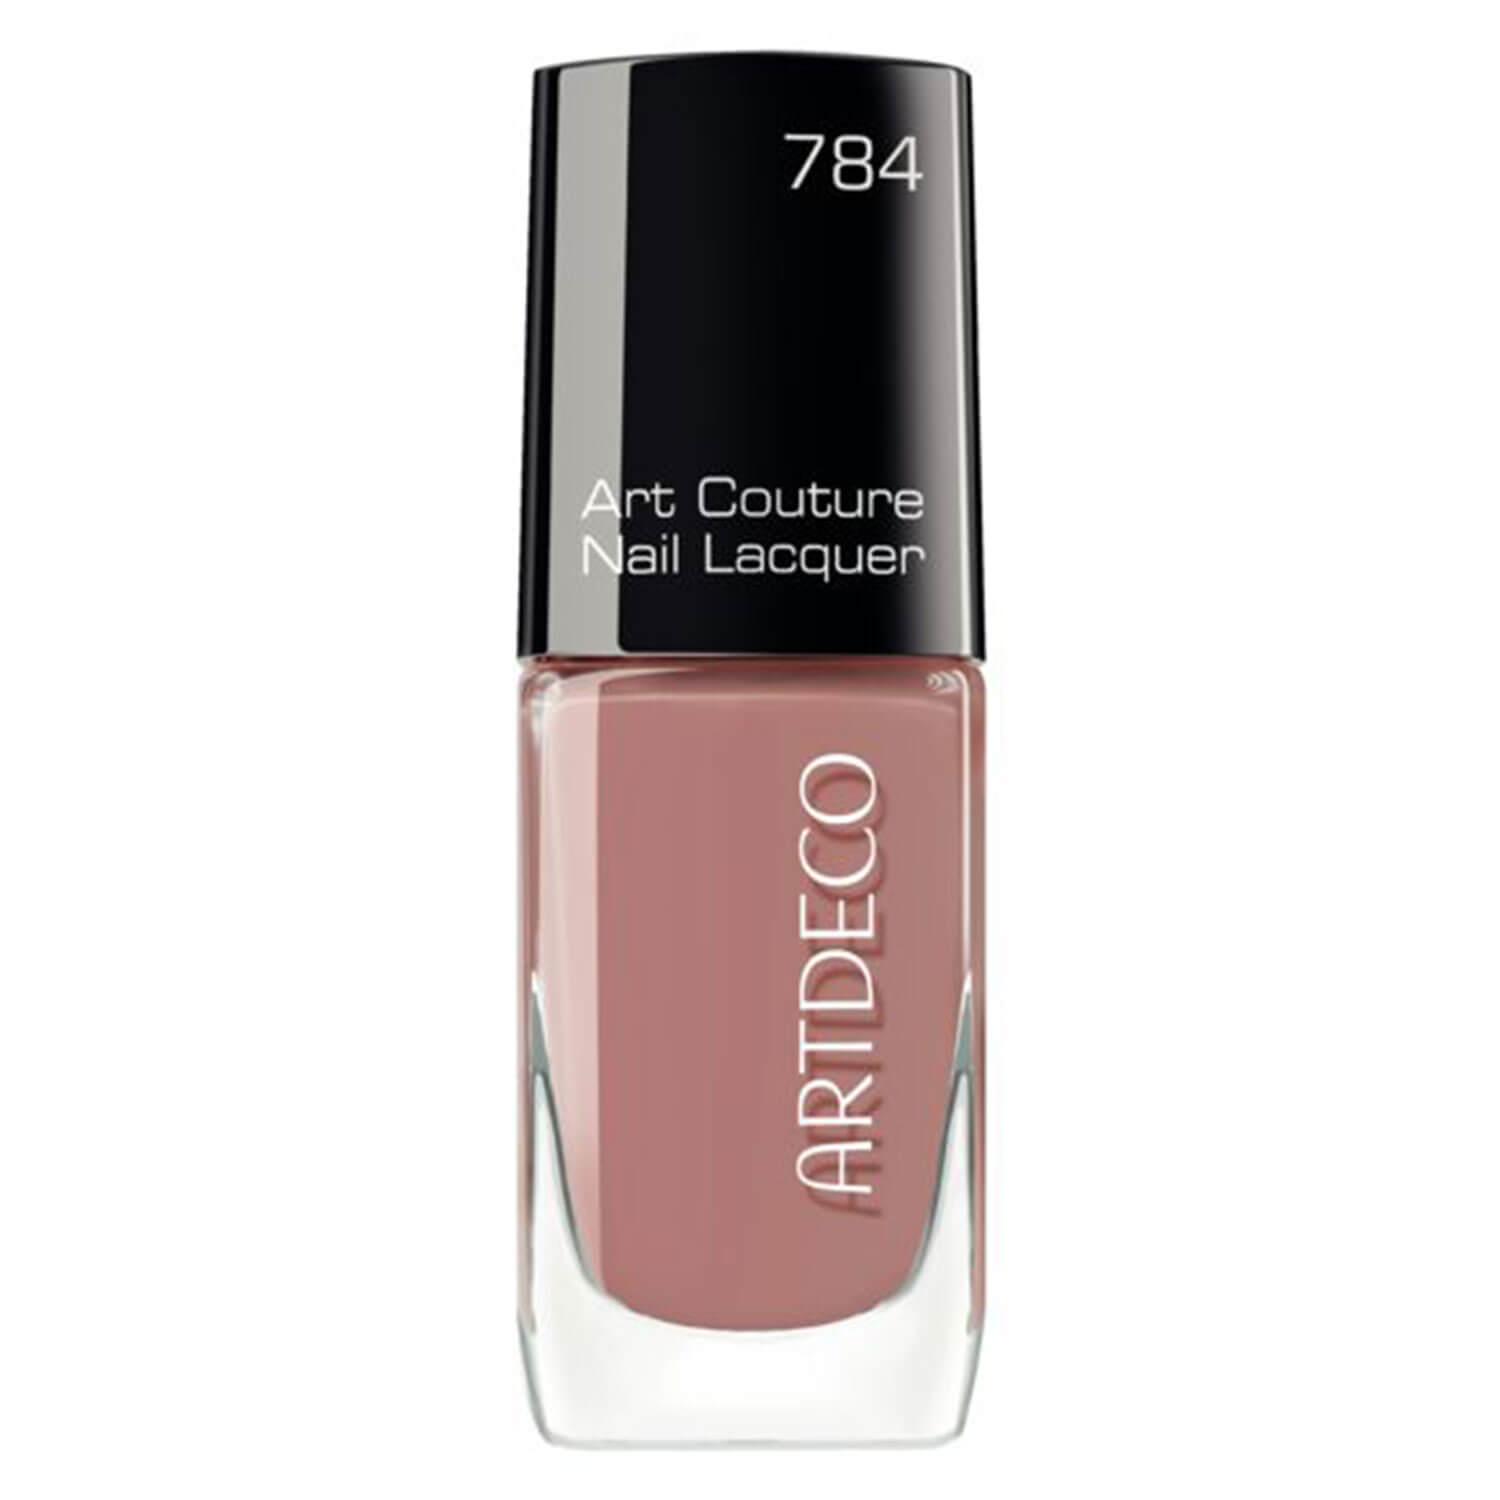 Art Couture - Nail Lacquer Classic Rose 784